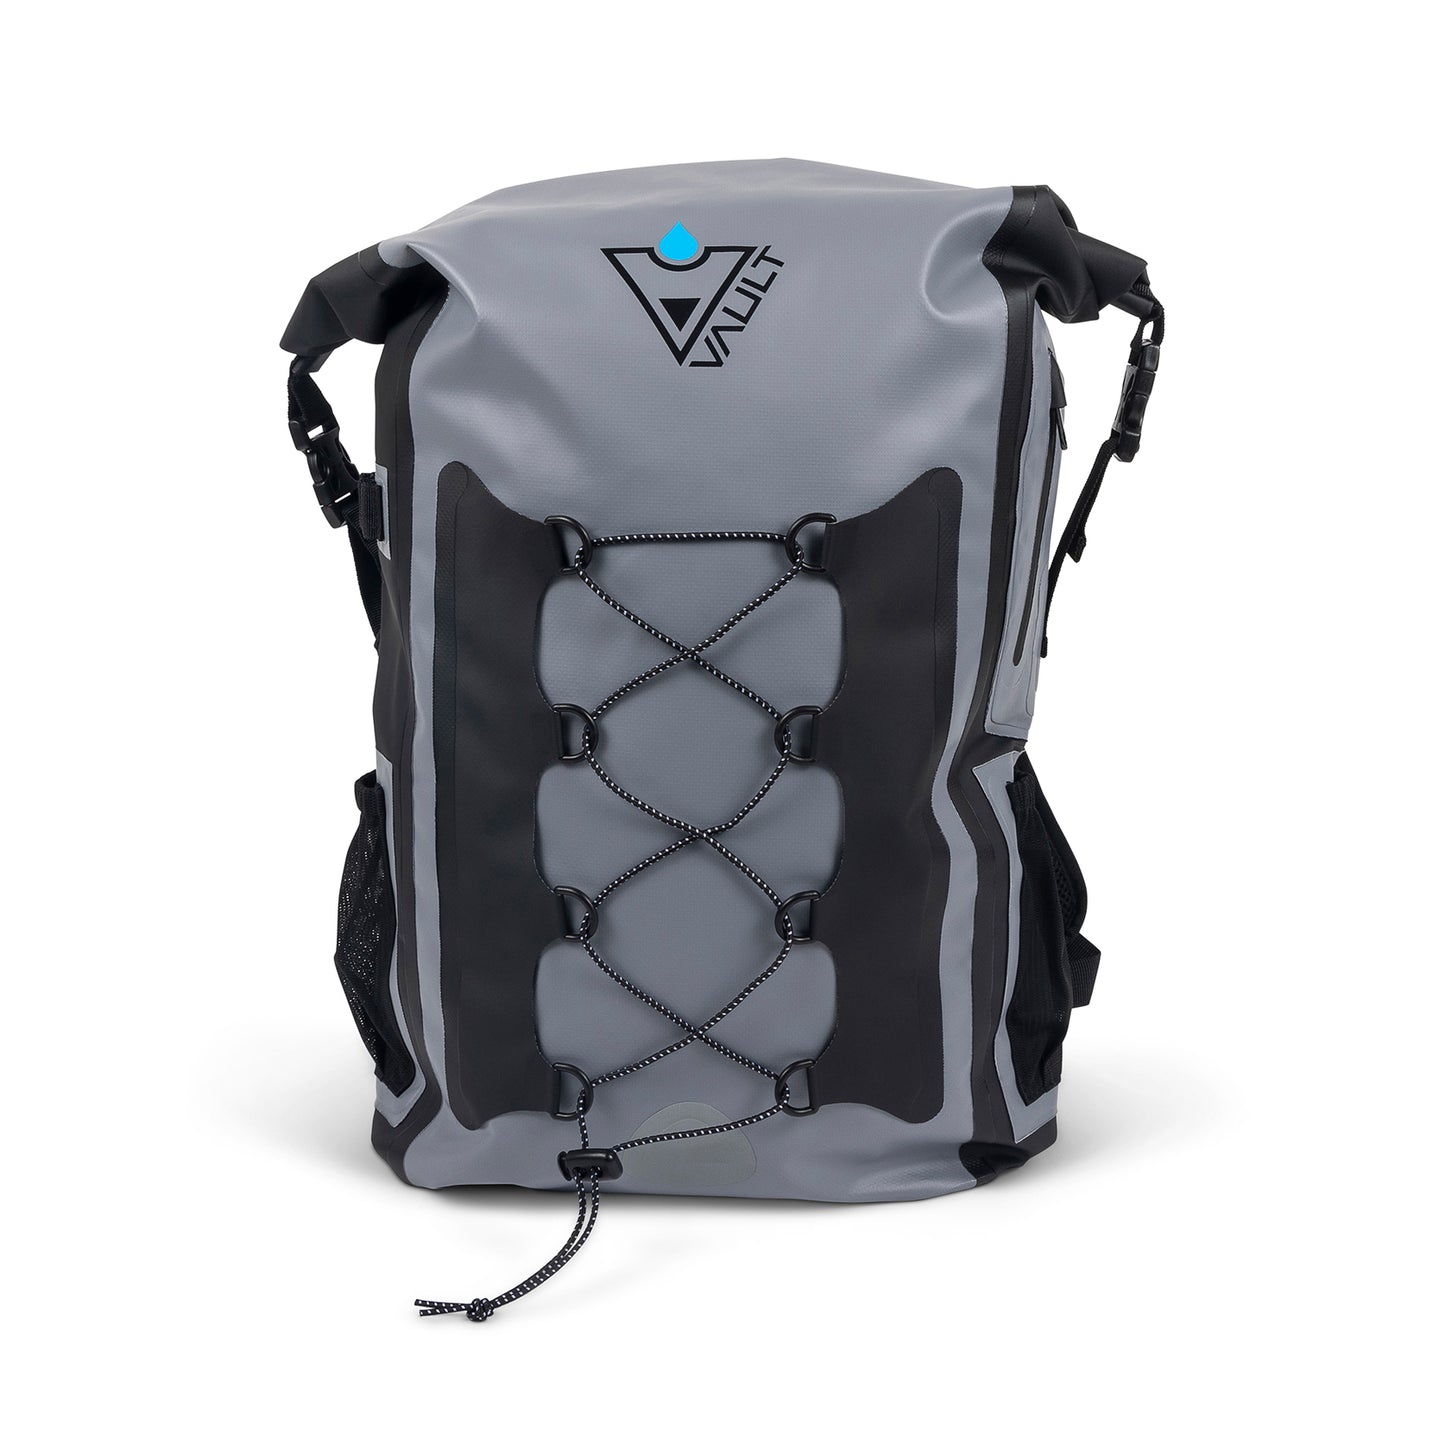 The most sleek stylish rugged and comfortable waterproof backpack on the market